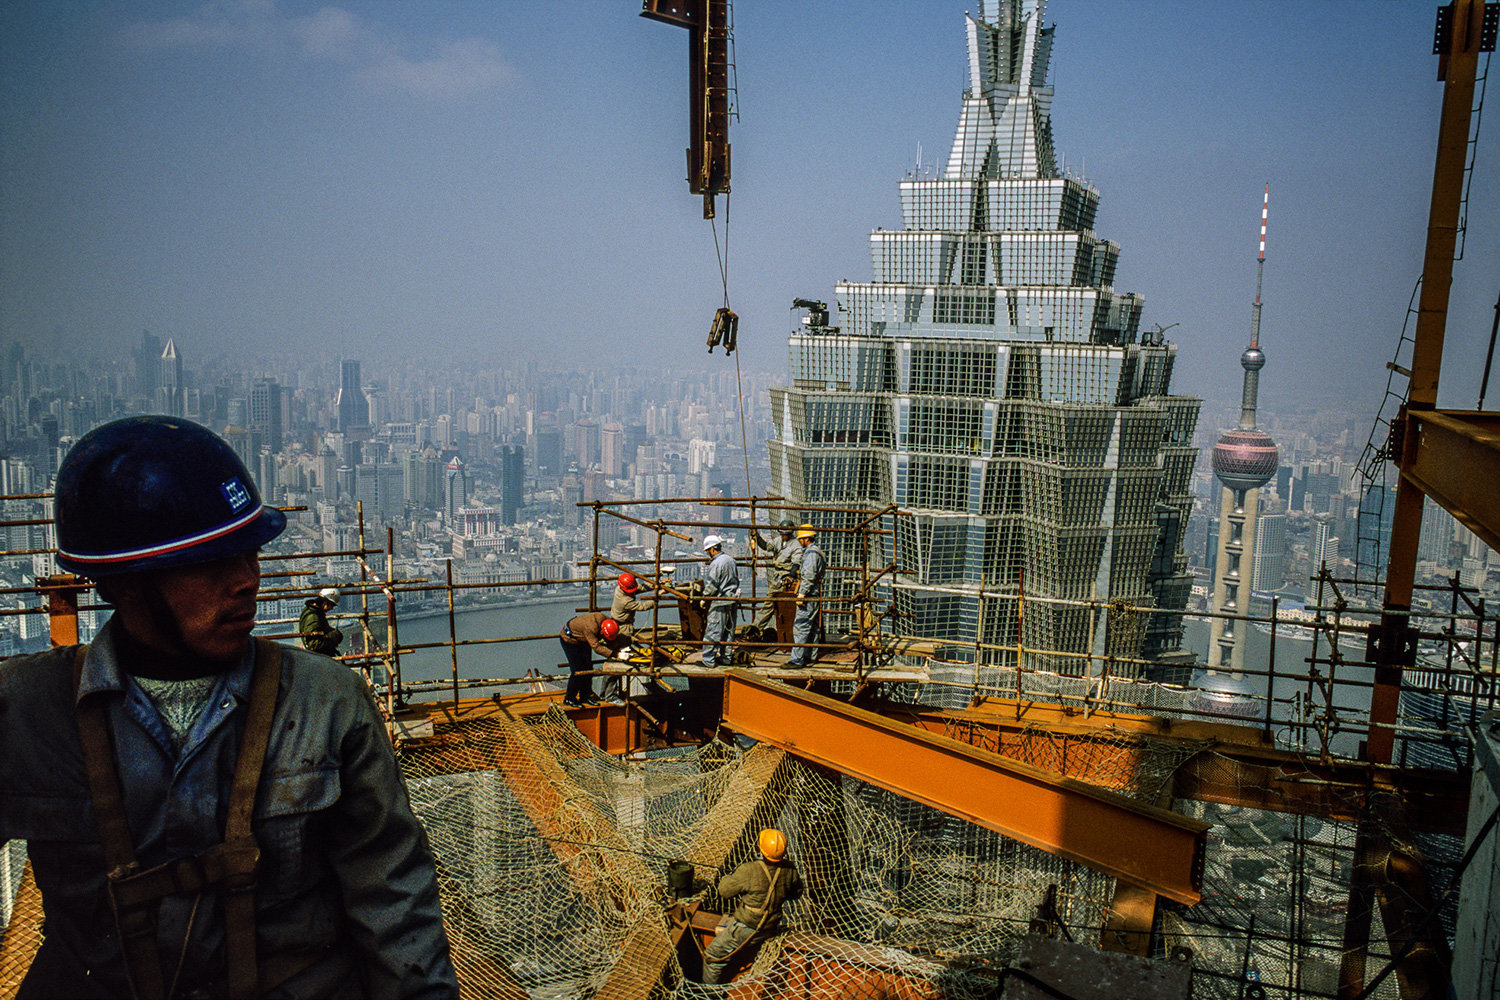 Steel workers from Sichuan set beams on the 88th floor of the Shanghai World Financial Center superstructure under construction in Lujiazui, 2007.